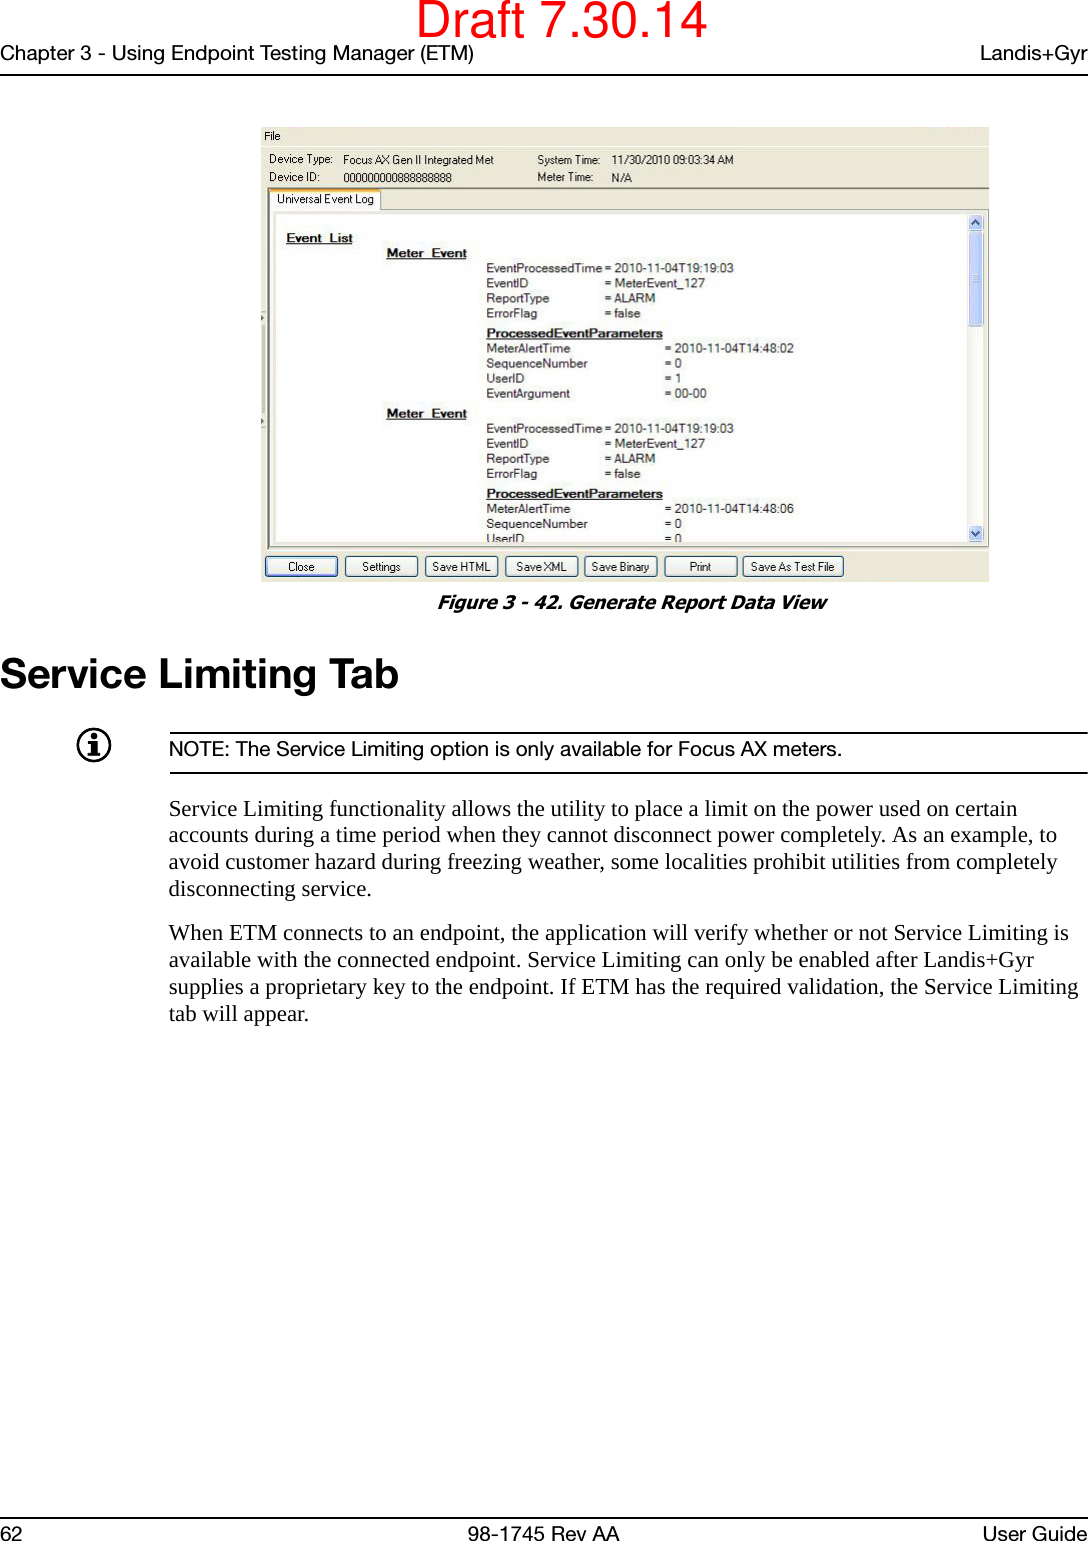 Chapter 3 - Using Endpoint Testing Manager (ETM) Landis+Gyr62 98-1745 Rev AA User Guide Figure 3 - 42. Generate Report Data ViewService Limiting TabNOTE: The Service Limiting option is only available for Focus AX meters.Service Limiting functionality allows the utility to place a limit on the power used on certain accounts during a time period when they cannot disconnect power completely. As an example, to avoid customer hazard during freezing weather, some localities prohibit utilities from completely disconnecting service. When ETM connects to an endpoint, the application will verify whether or not Service Limiting is available with the connected endpoint. Service Limiting can only be enabled after Landis+Gyr supplies a proprietary key to the endpoint. If ETM has the required validation, the Service Limiting tab will appear.Draft 7.30.14